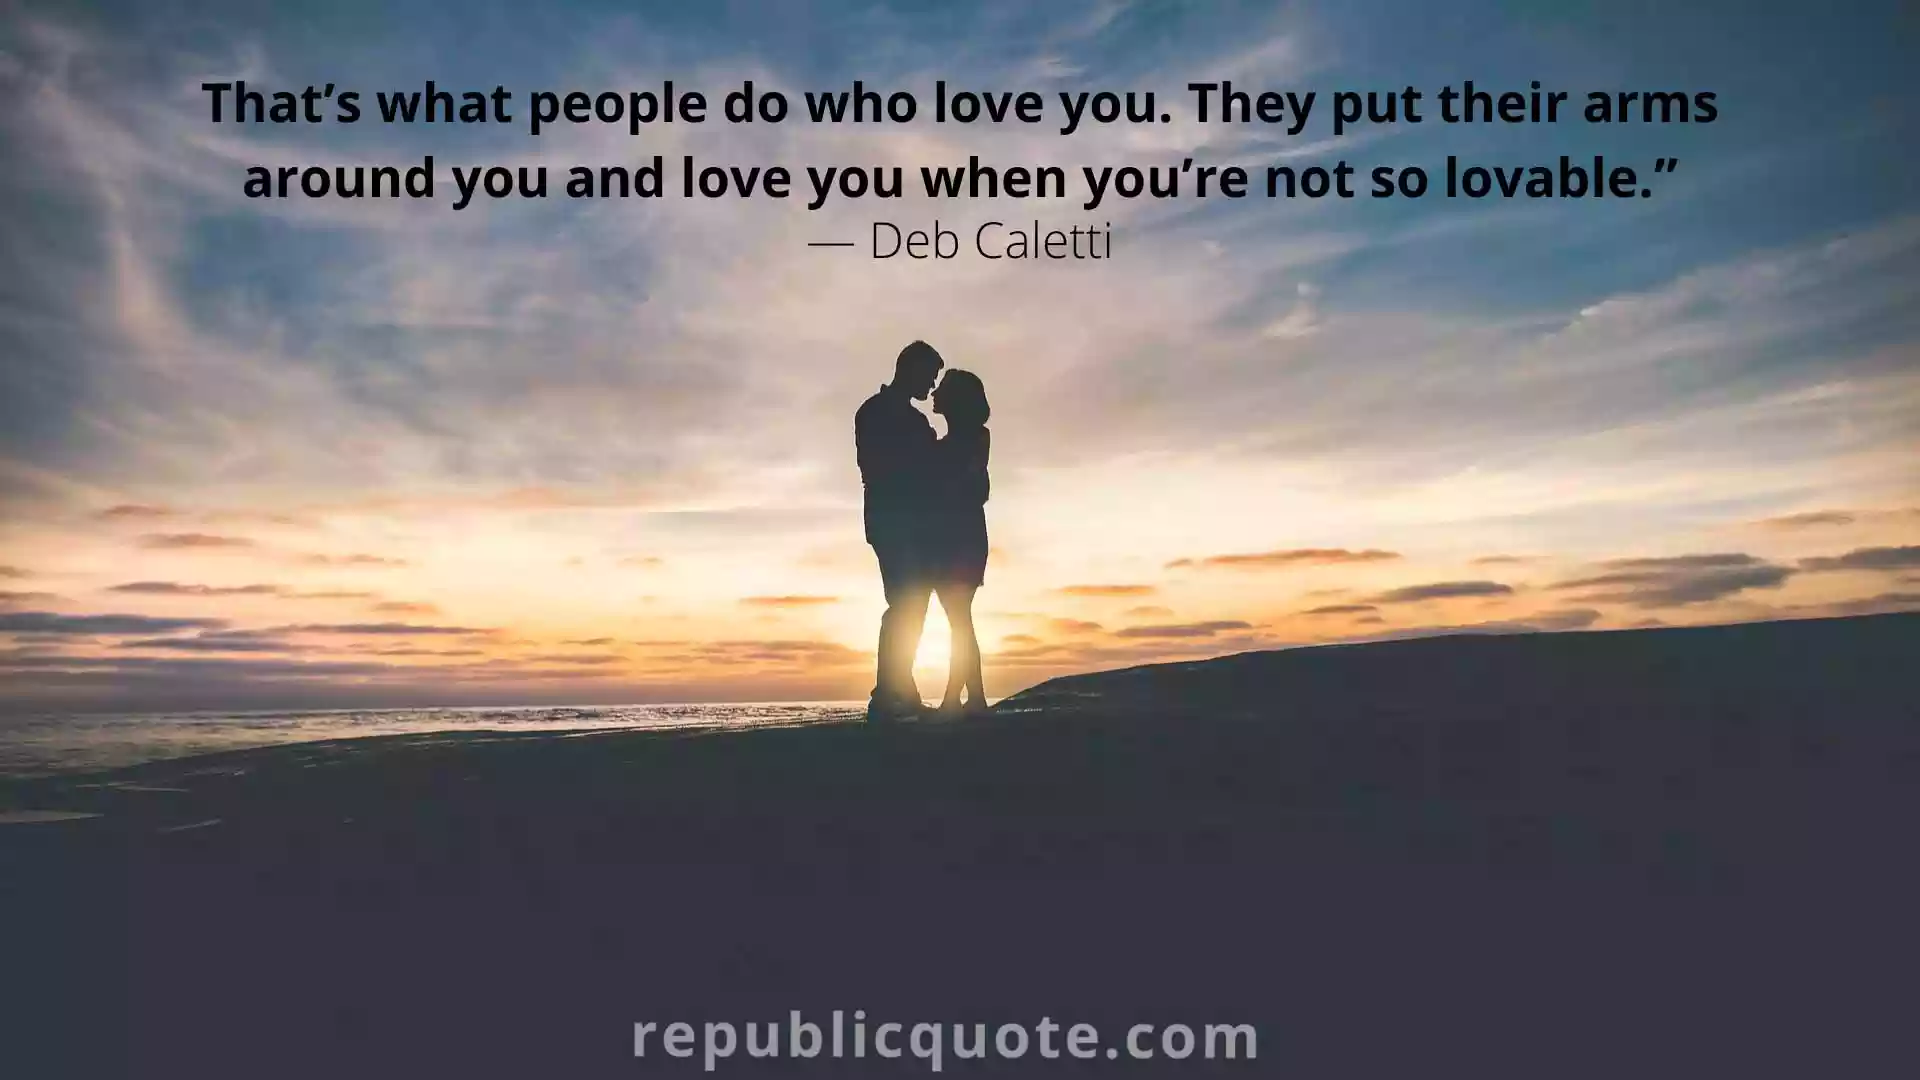 30+ Best Hug Quotes for Friendship | Cute Hug Quotes & Sayings